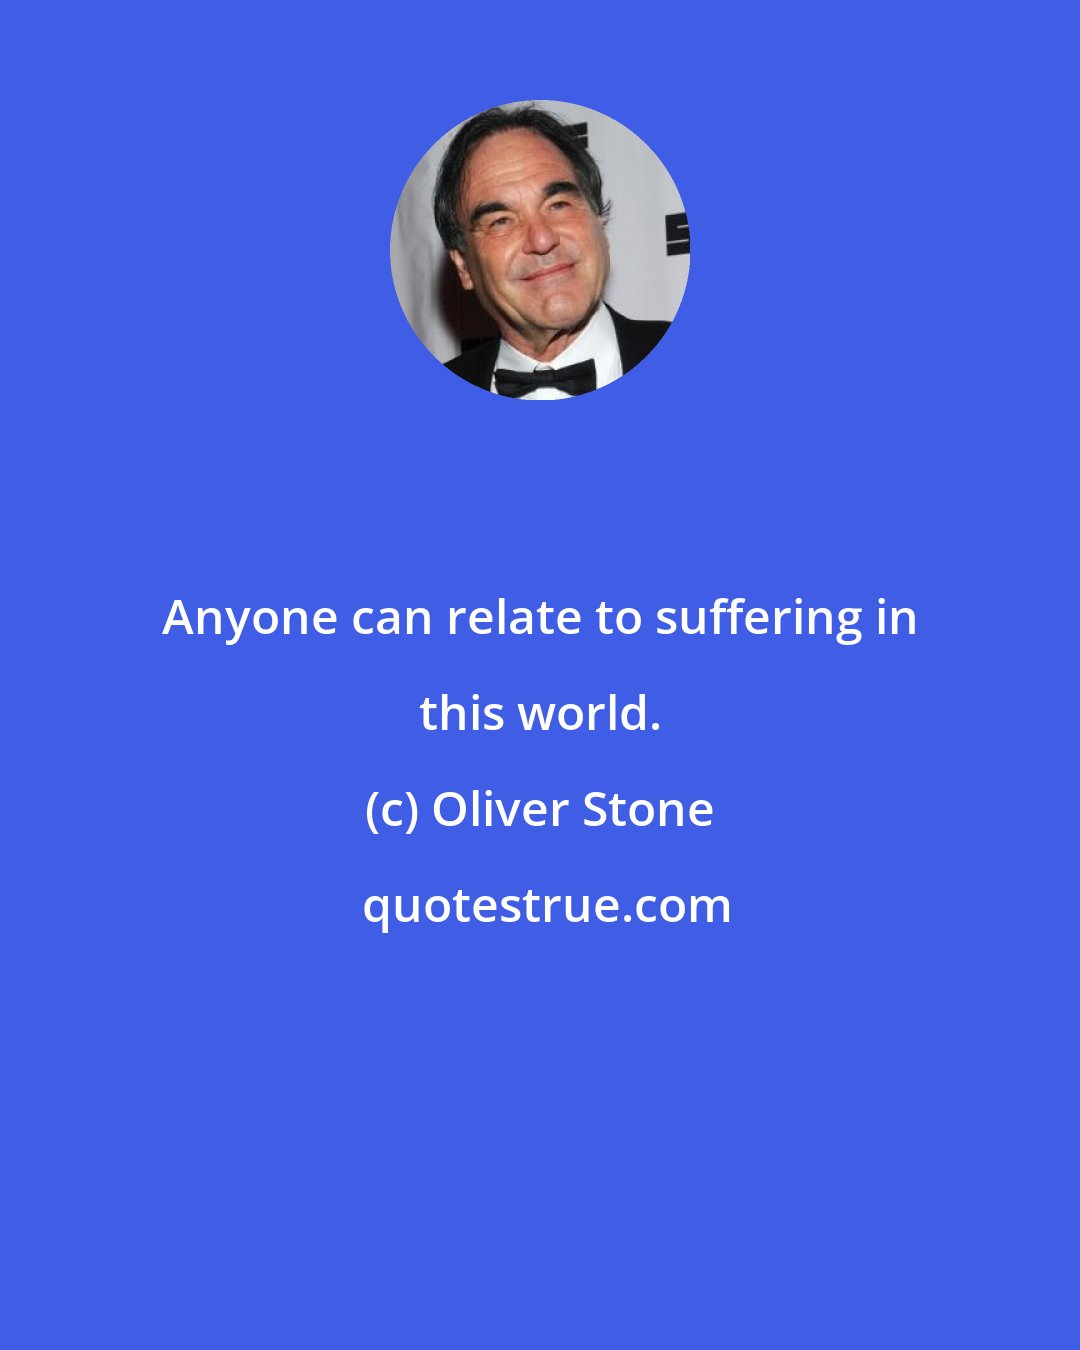 Oliver Stone: Anyone can relate to suffering in this world.